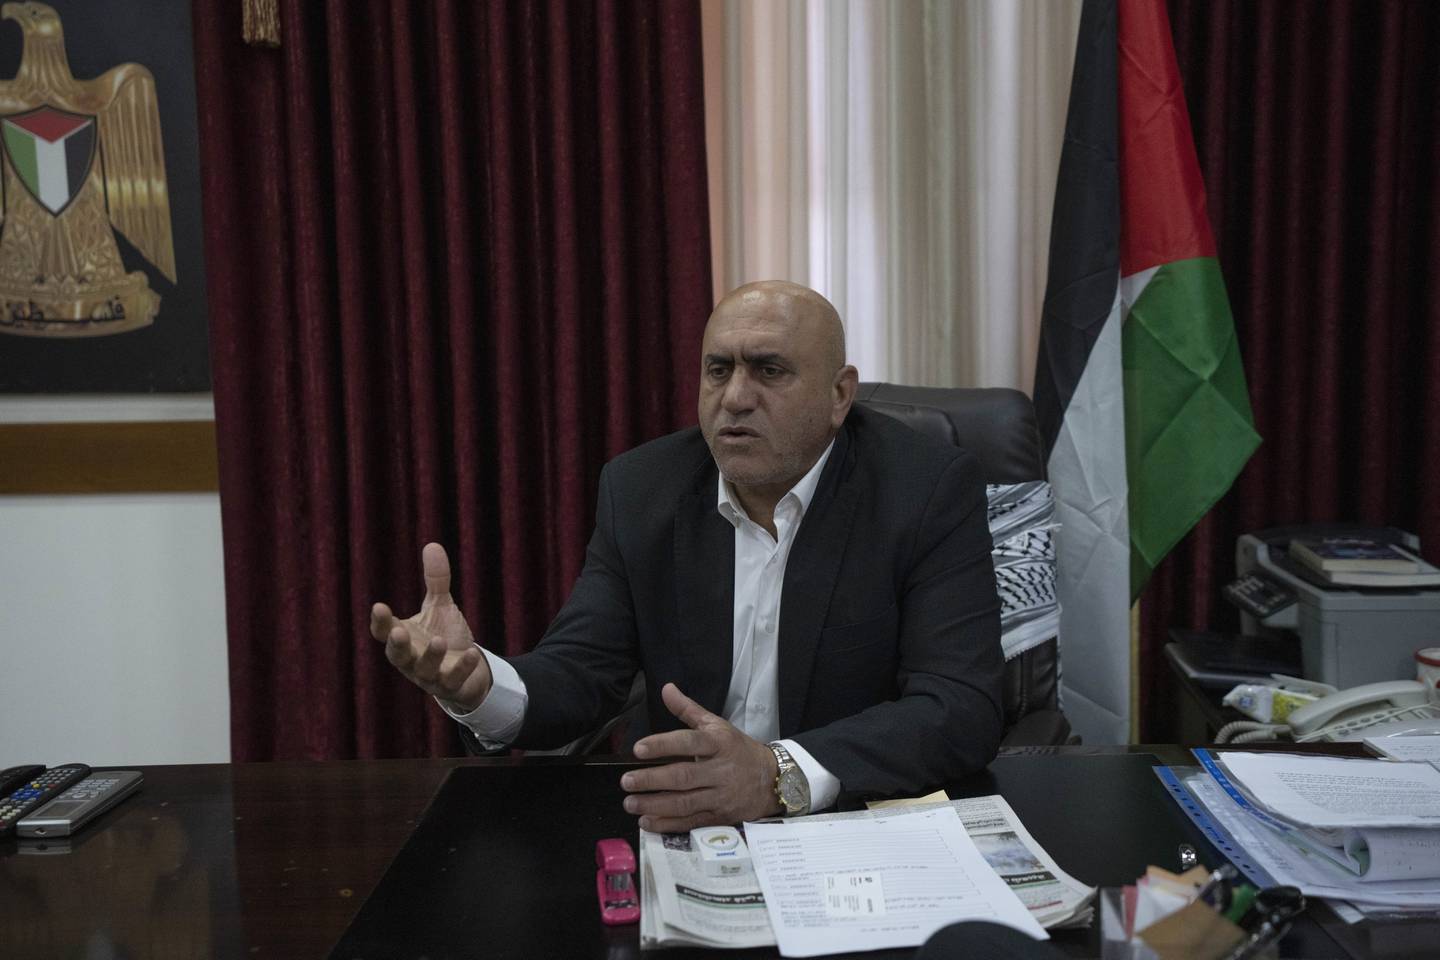 Jenin's governor, Akram Rajoub, talks to reporters at his office in the West Bank. AP Photo